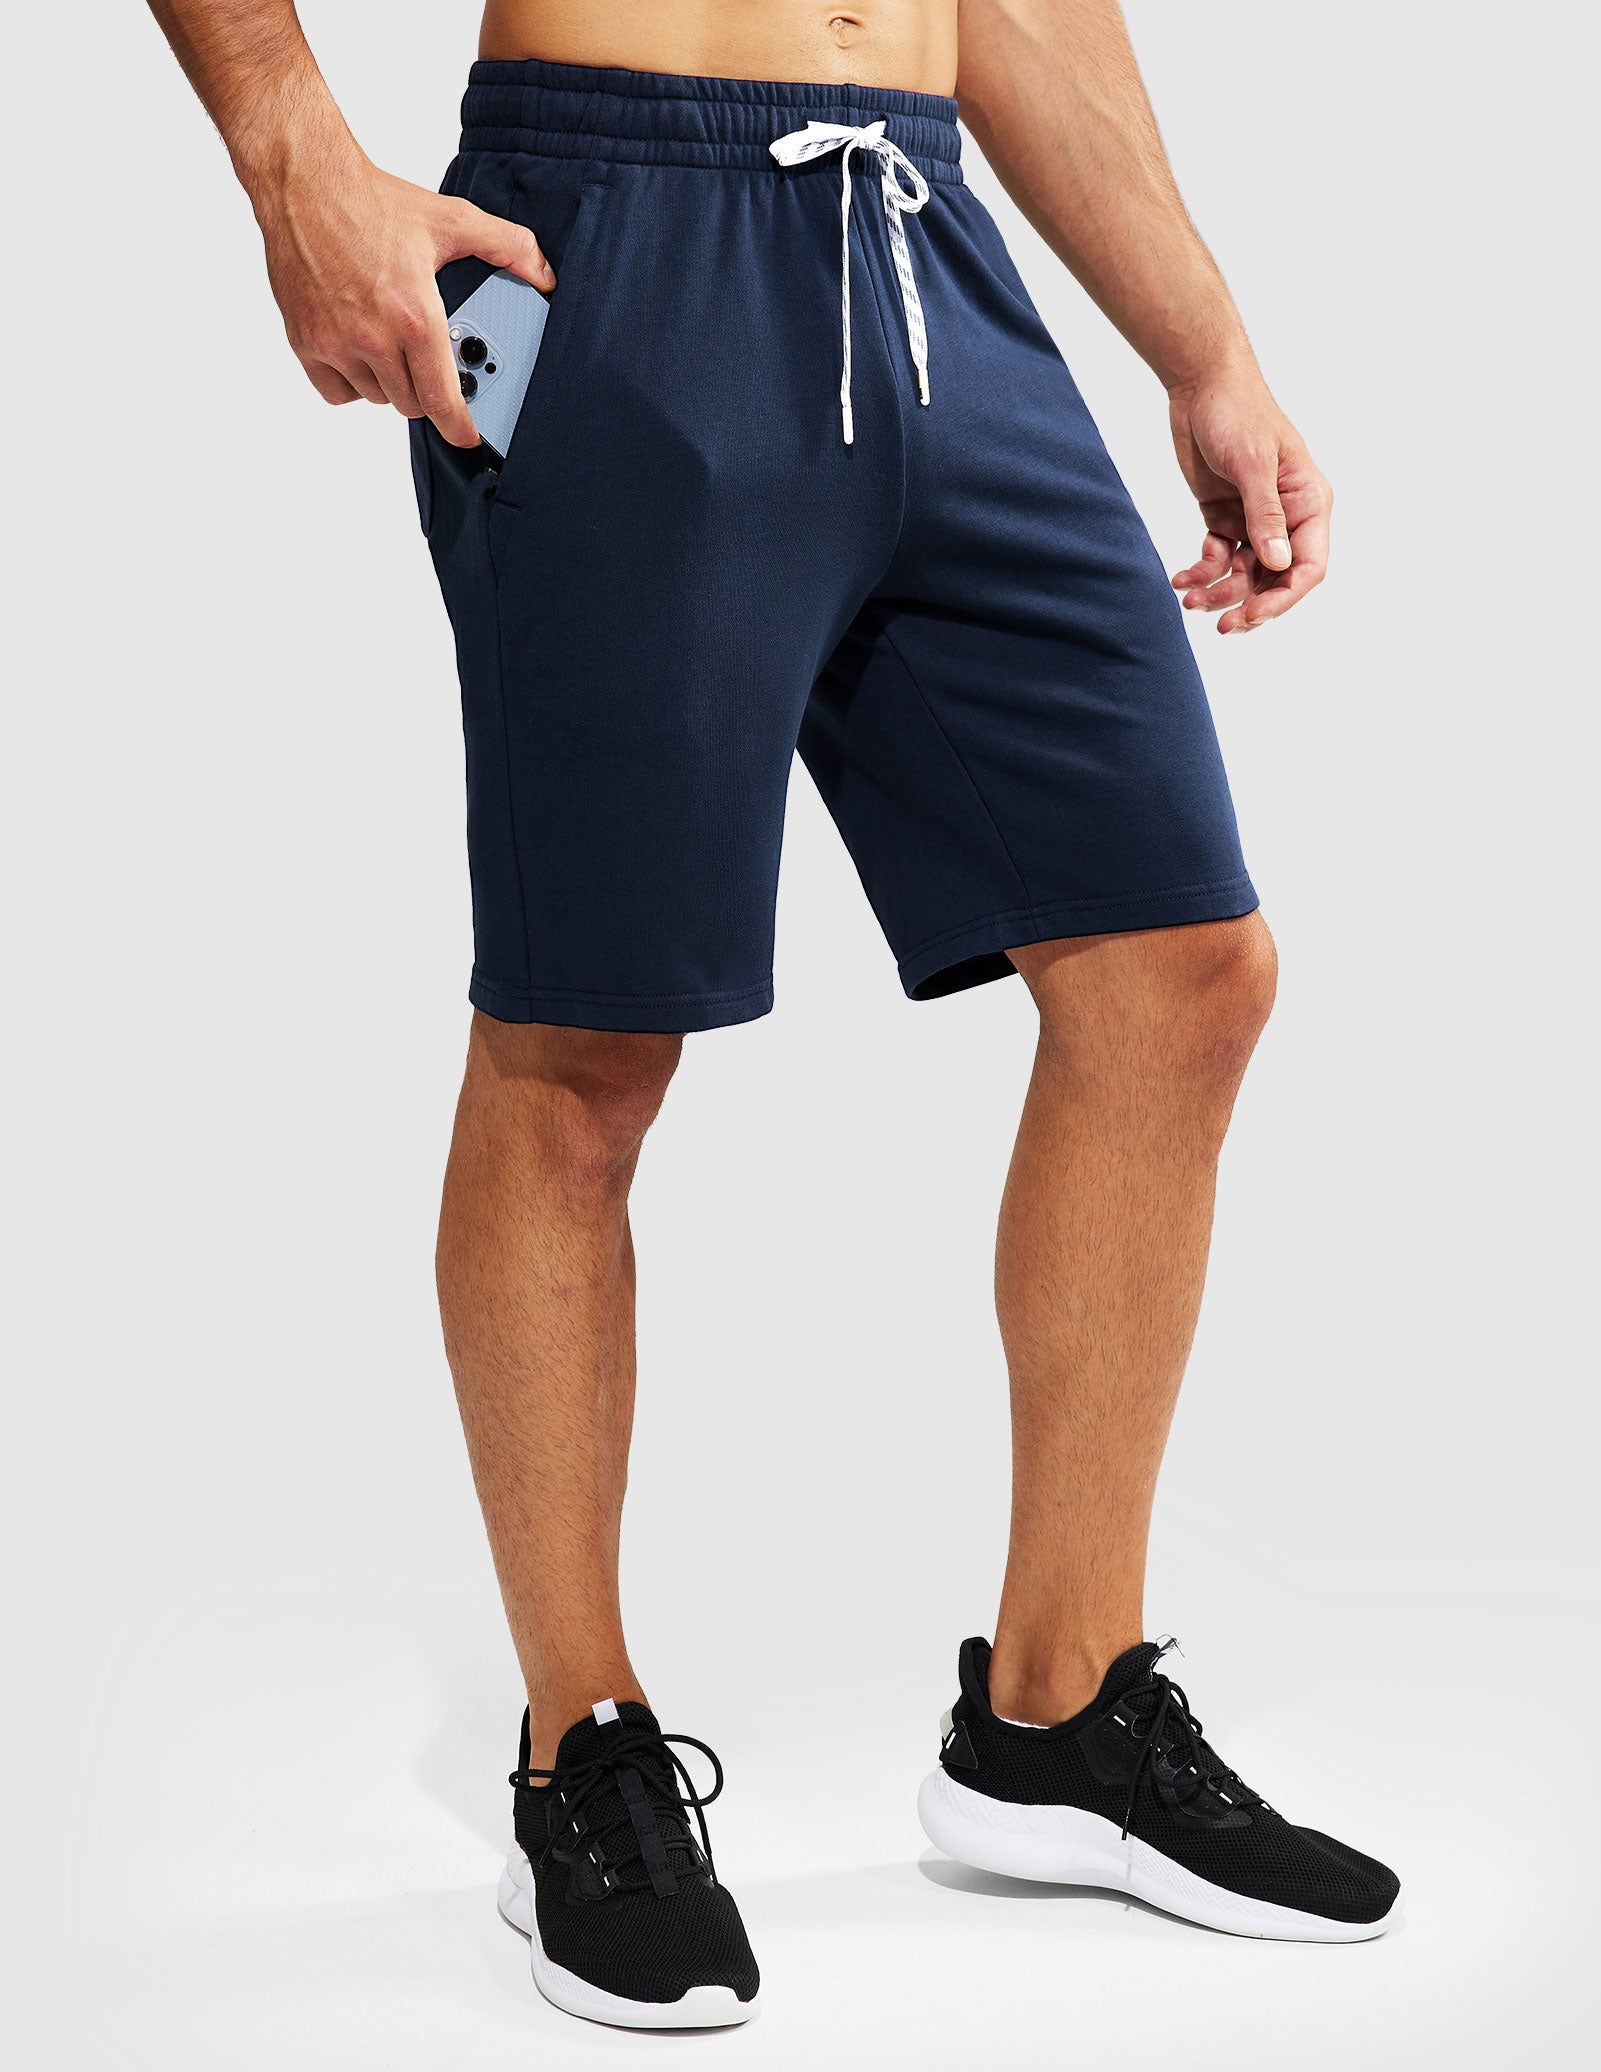 Men's 9-Inch Athletic Cotton Shorts with Pockets